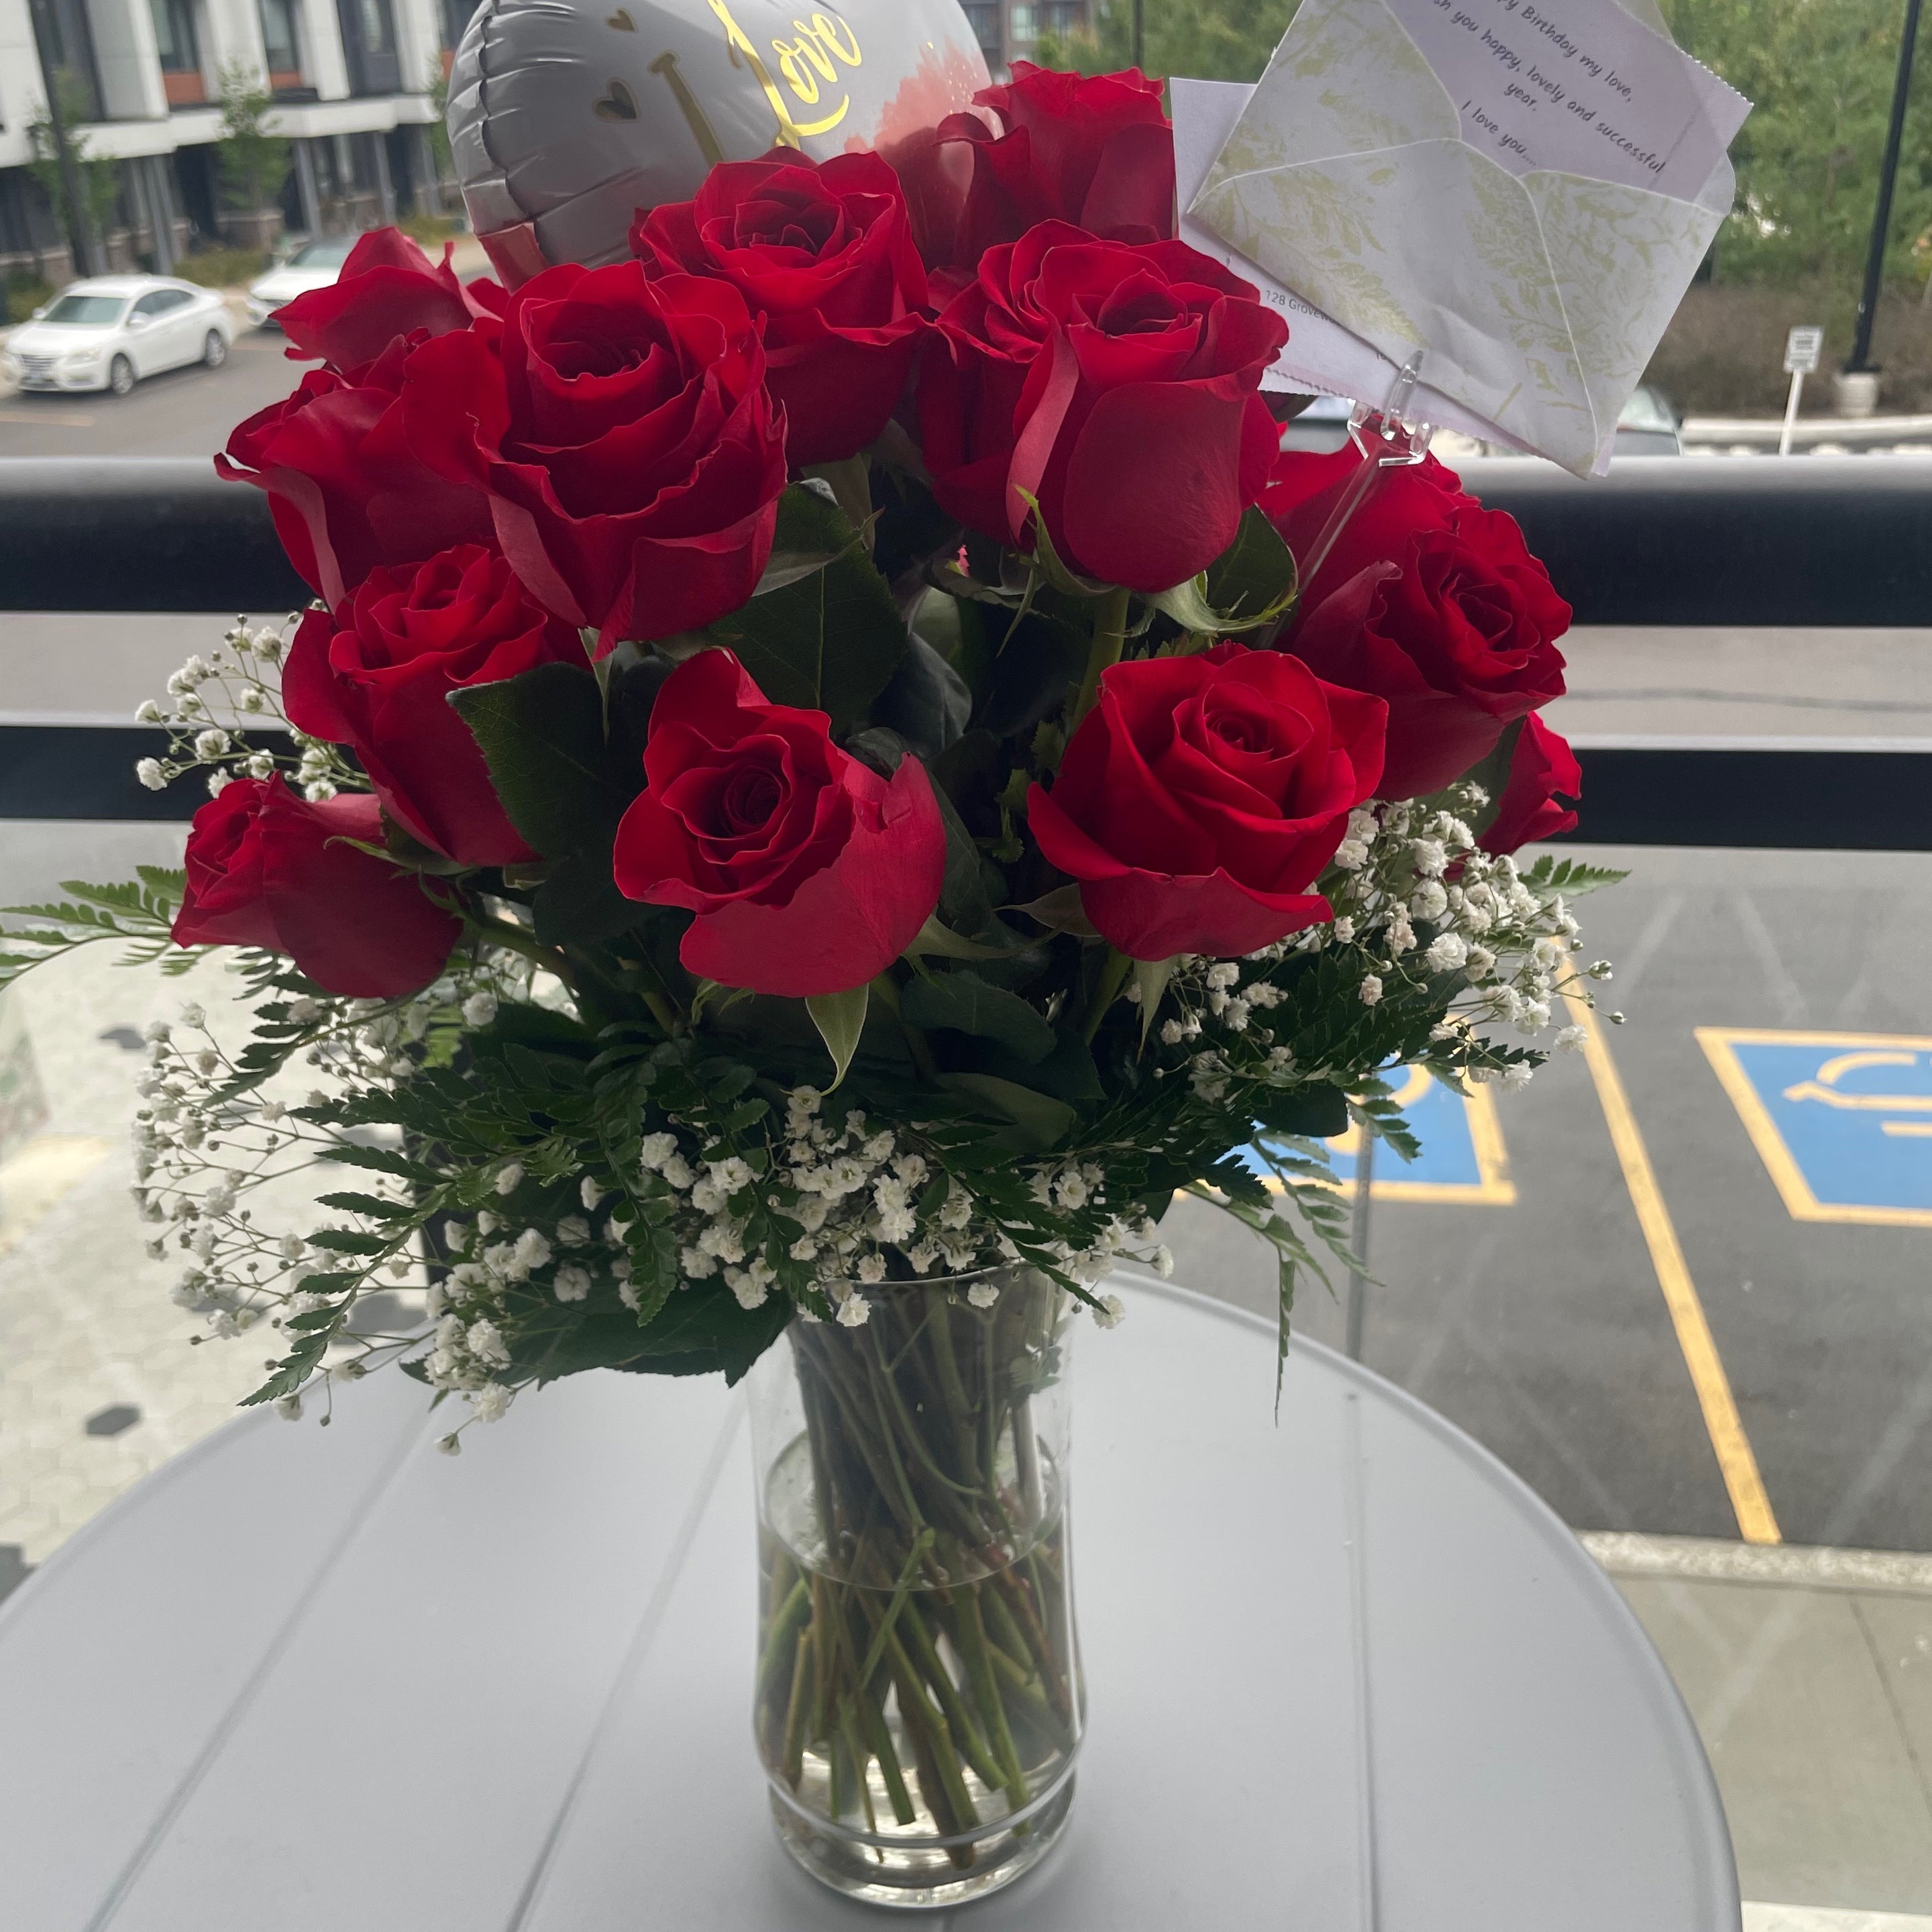 Gracious photo contribution from the recipient for Two Dozen Red Roses